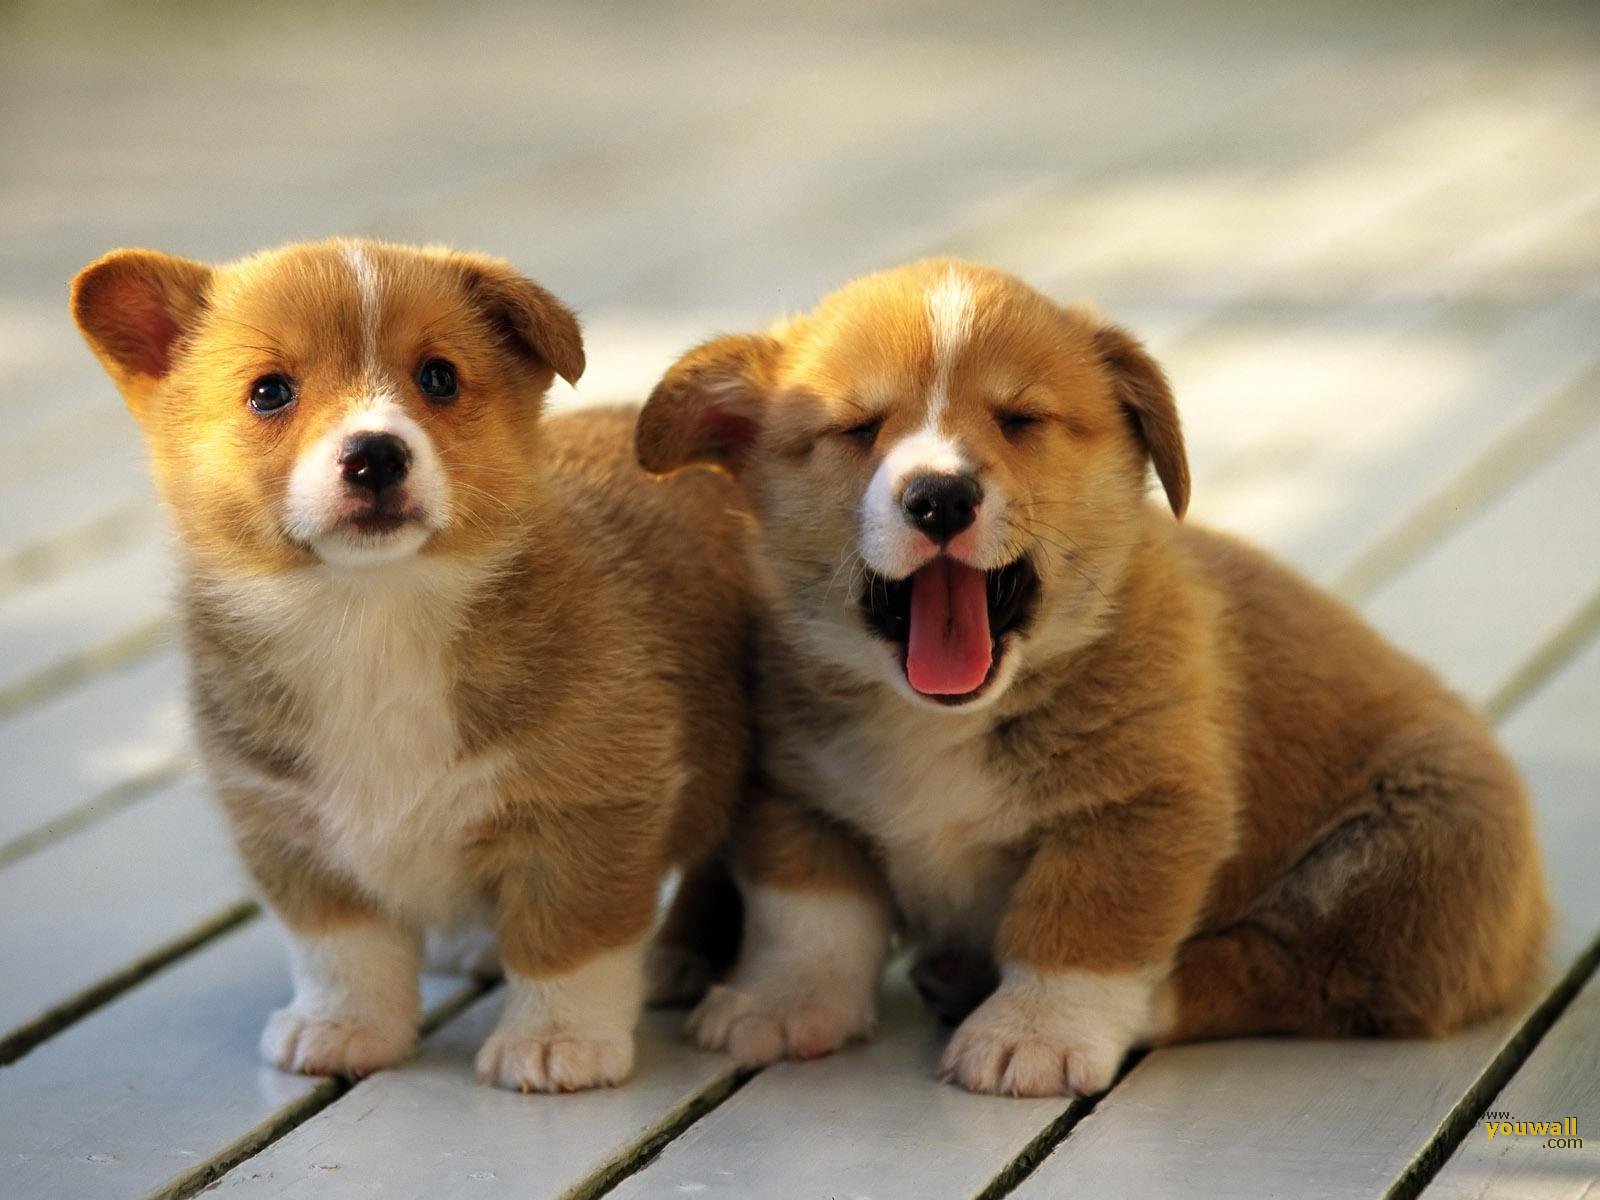 mobile desktop background cute dogs pictures wallpapers download